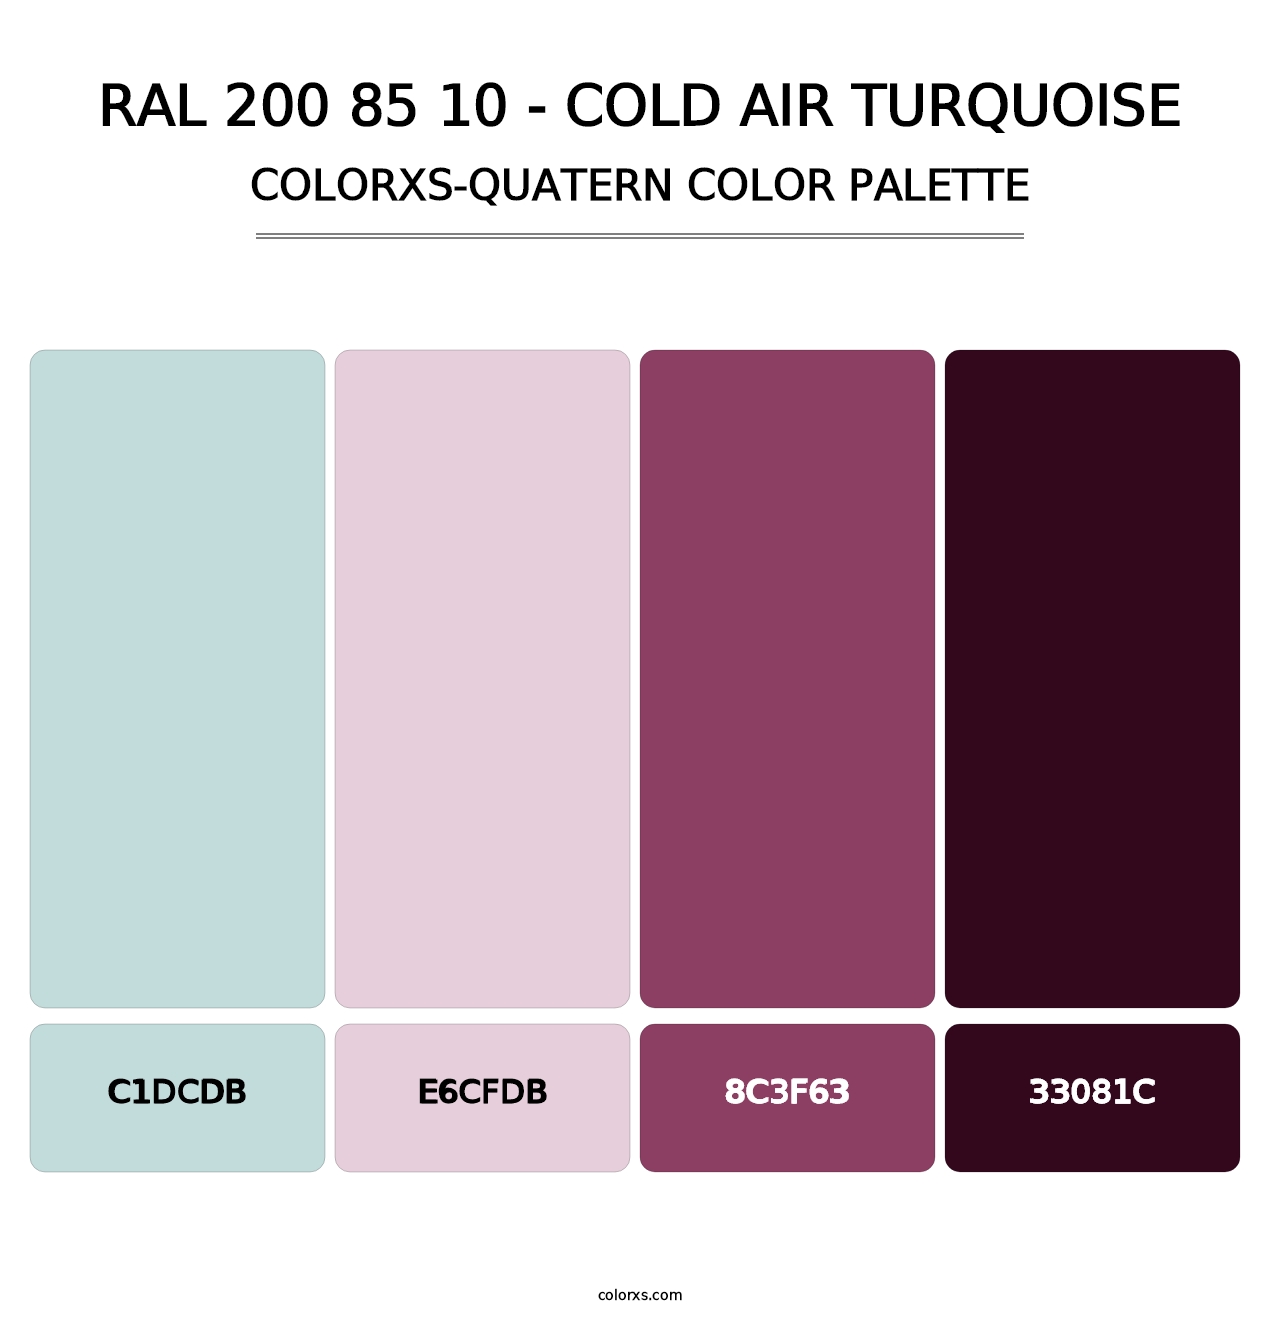 RAL 200 85 10 - Cold Air Turquoise - Colorxs Quatern Palette